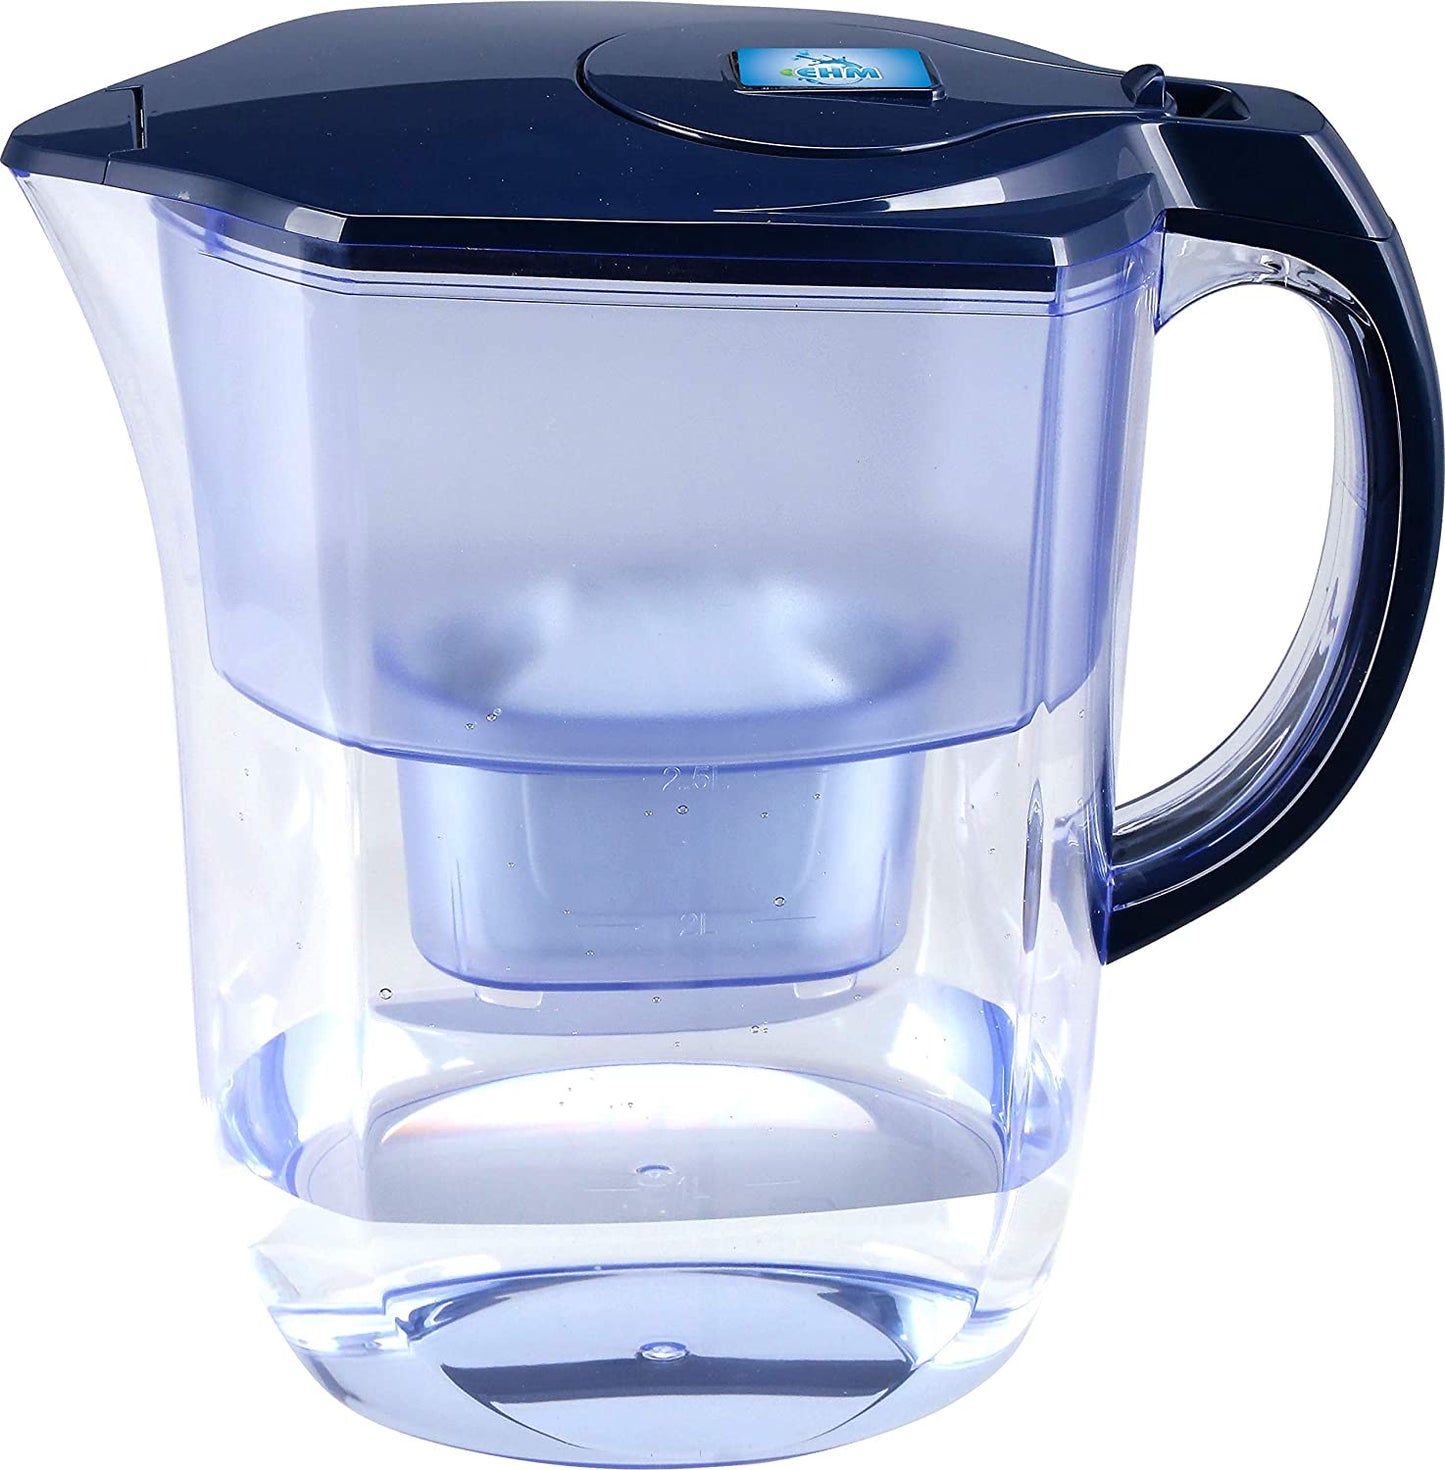 Ehm Ultra Premium Alkaline water Filter Pitcher - 3.8L, Activated Carbon Filter- BPA Free, Healthy, Clean, & Toxin-Free Mineralized Alkaline Water in Minutes- Up to 9.5 pH-2021